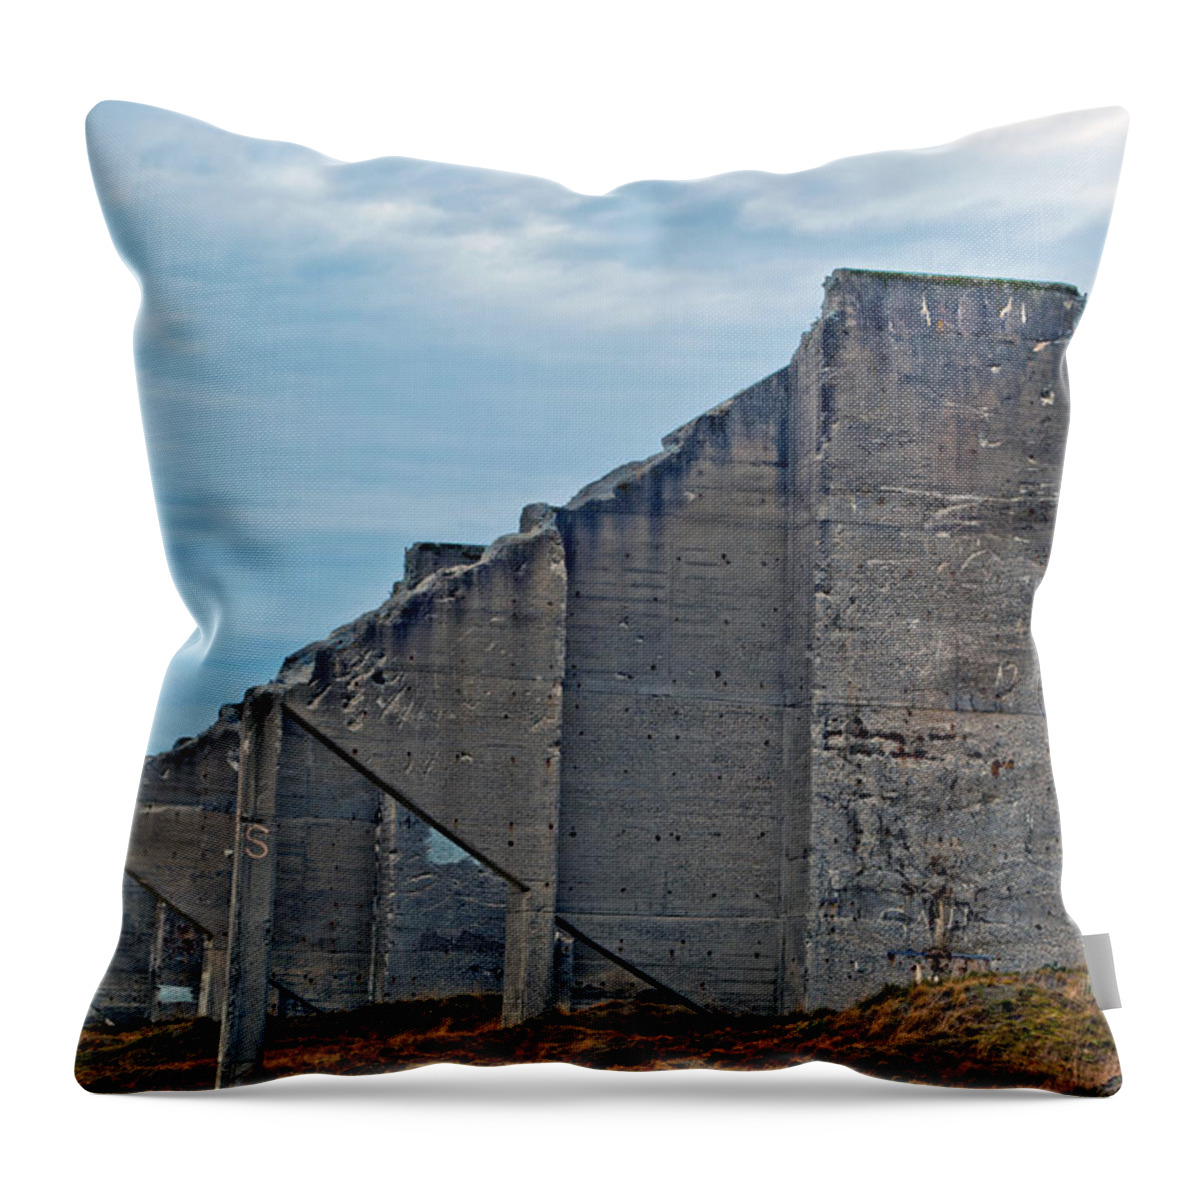 Chambers Bay Throw Pillow featuring the photograph Chambers Bay Architectural Ruins by Tikvah's Hope